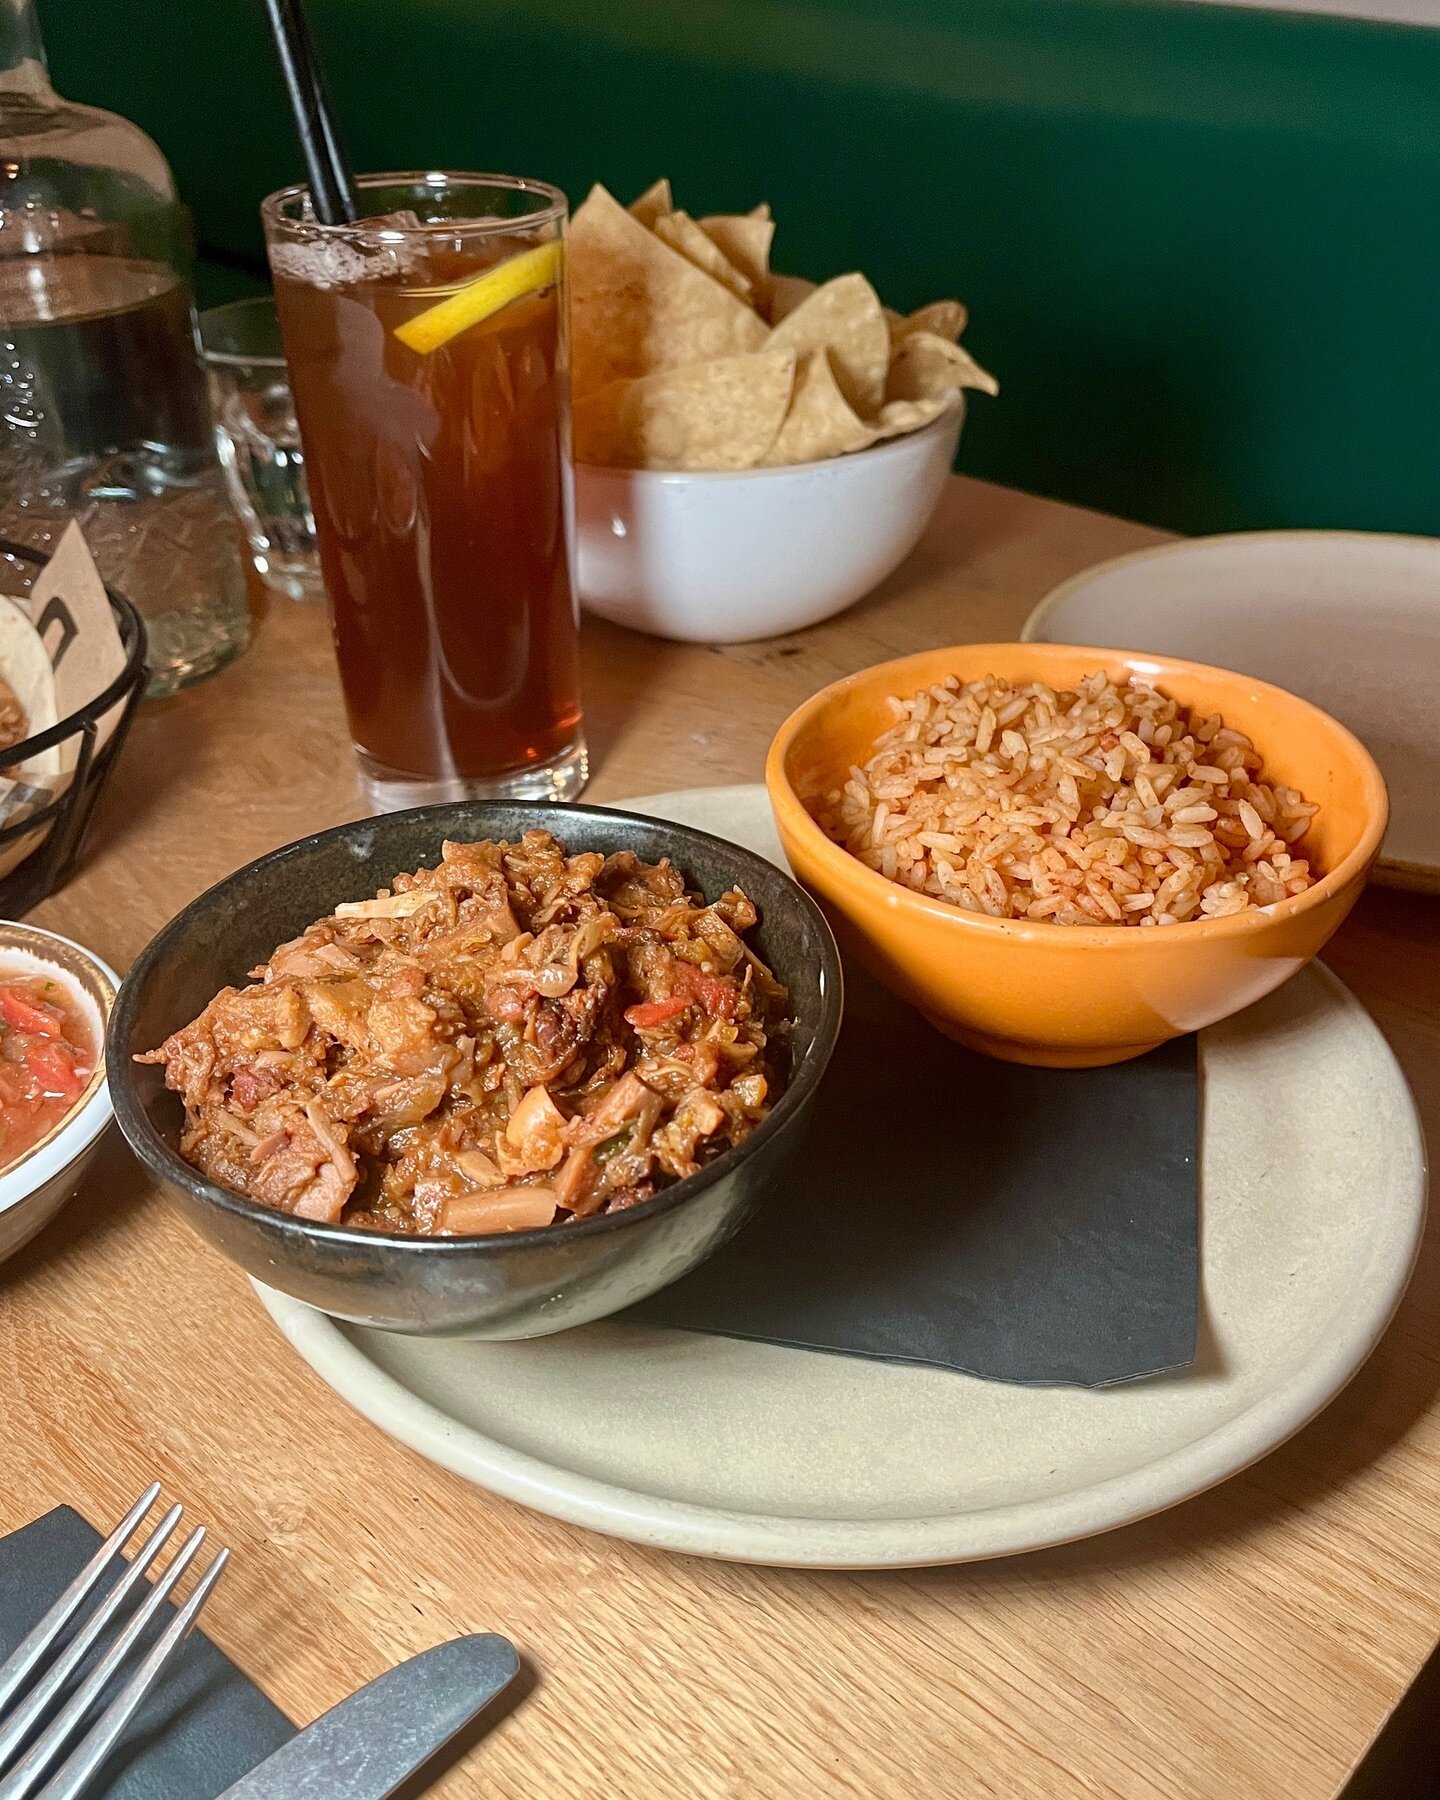 Are you doing #veganuary this year? Look no further than a bowl of our comforting vegan chilli. Made with Jackfruit and FULL of flavour 🌶️